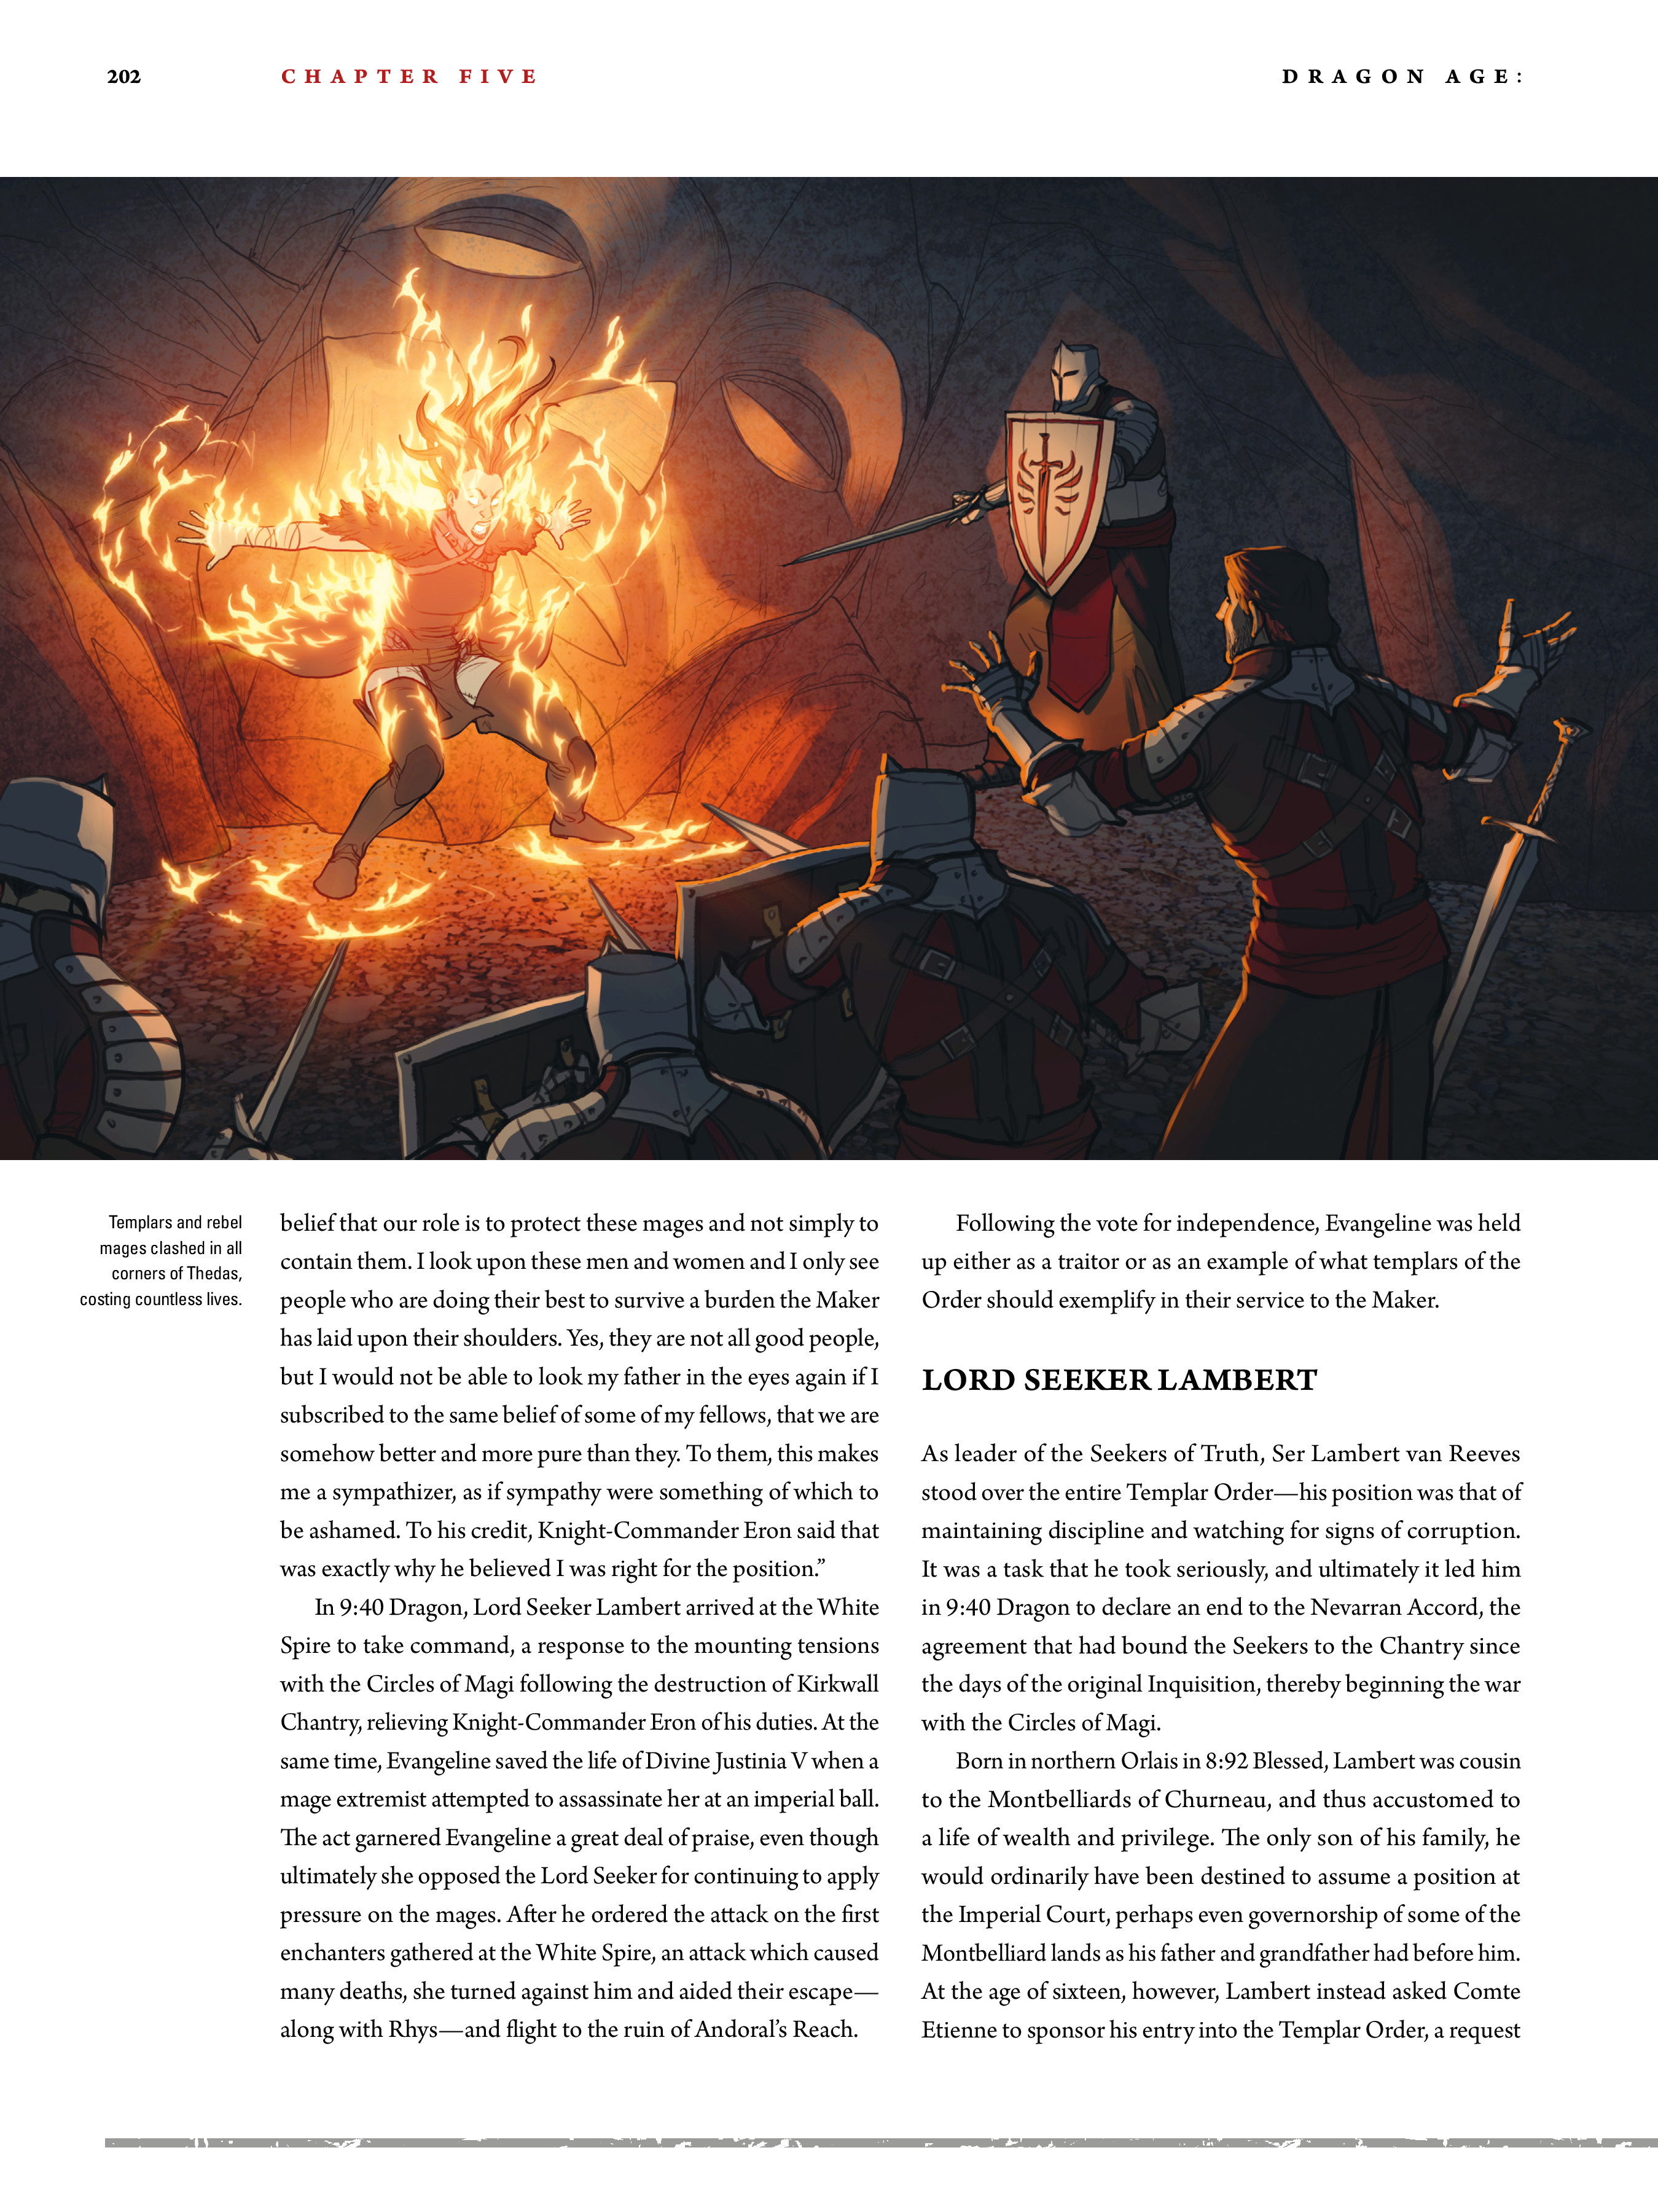 Read online Dragon Age: The World of Thedas comic -  Issue # TPB 2 - 197